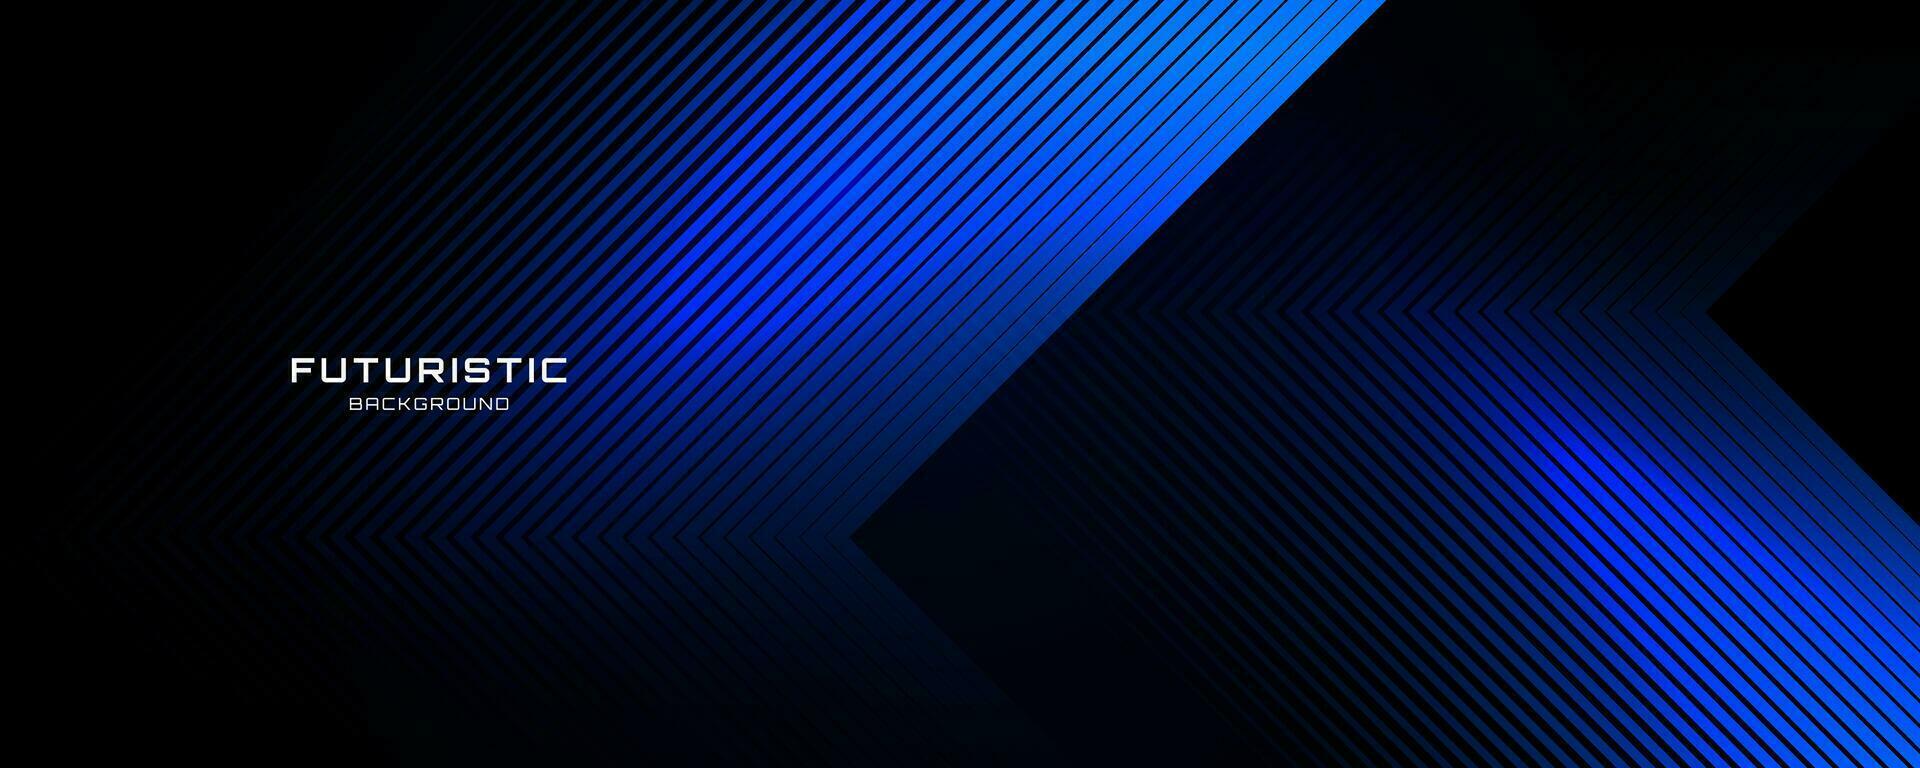 3D blue techno abstract background overlap layer on dark space with glowing lines shape decoration. Modern graphic design element future style concept for banner, flyer, card, or brochure cover vector